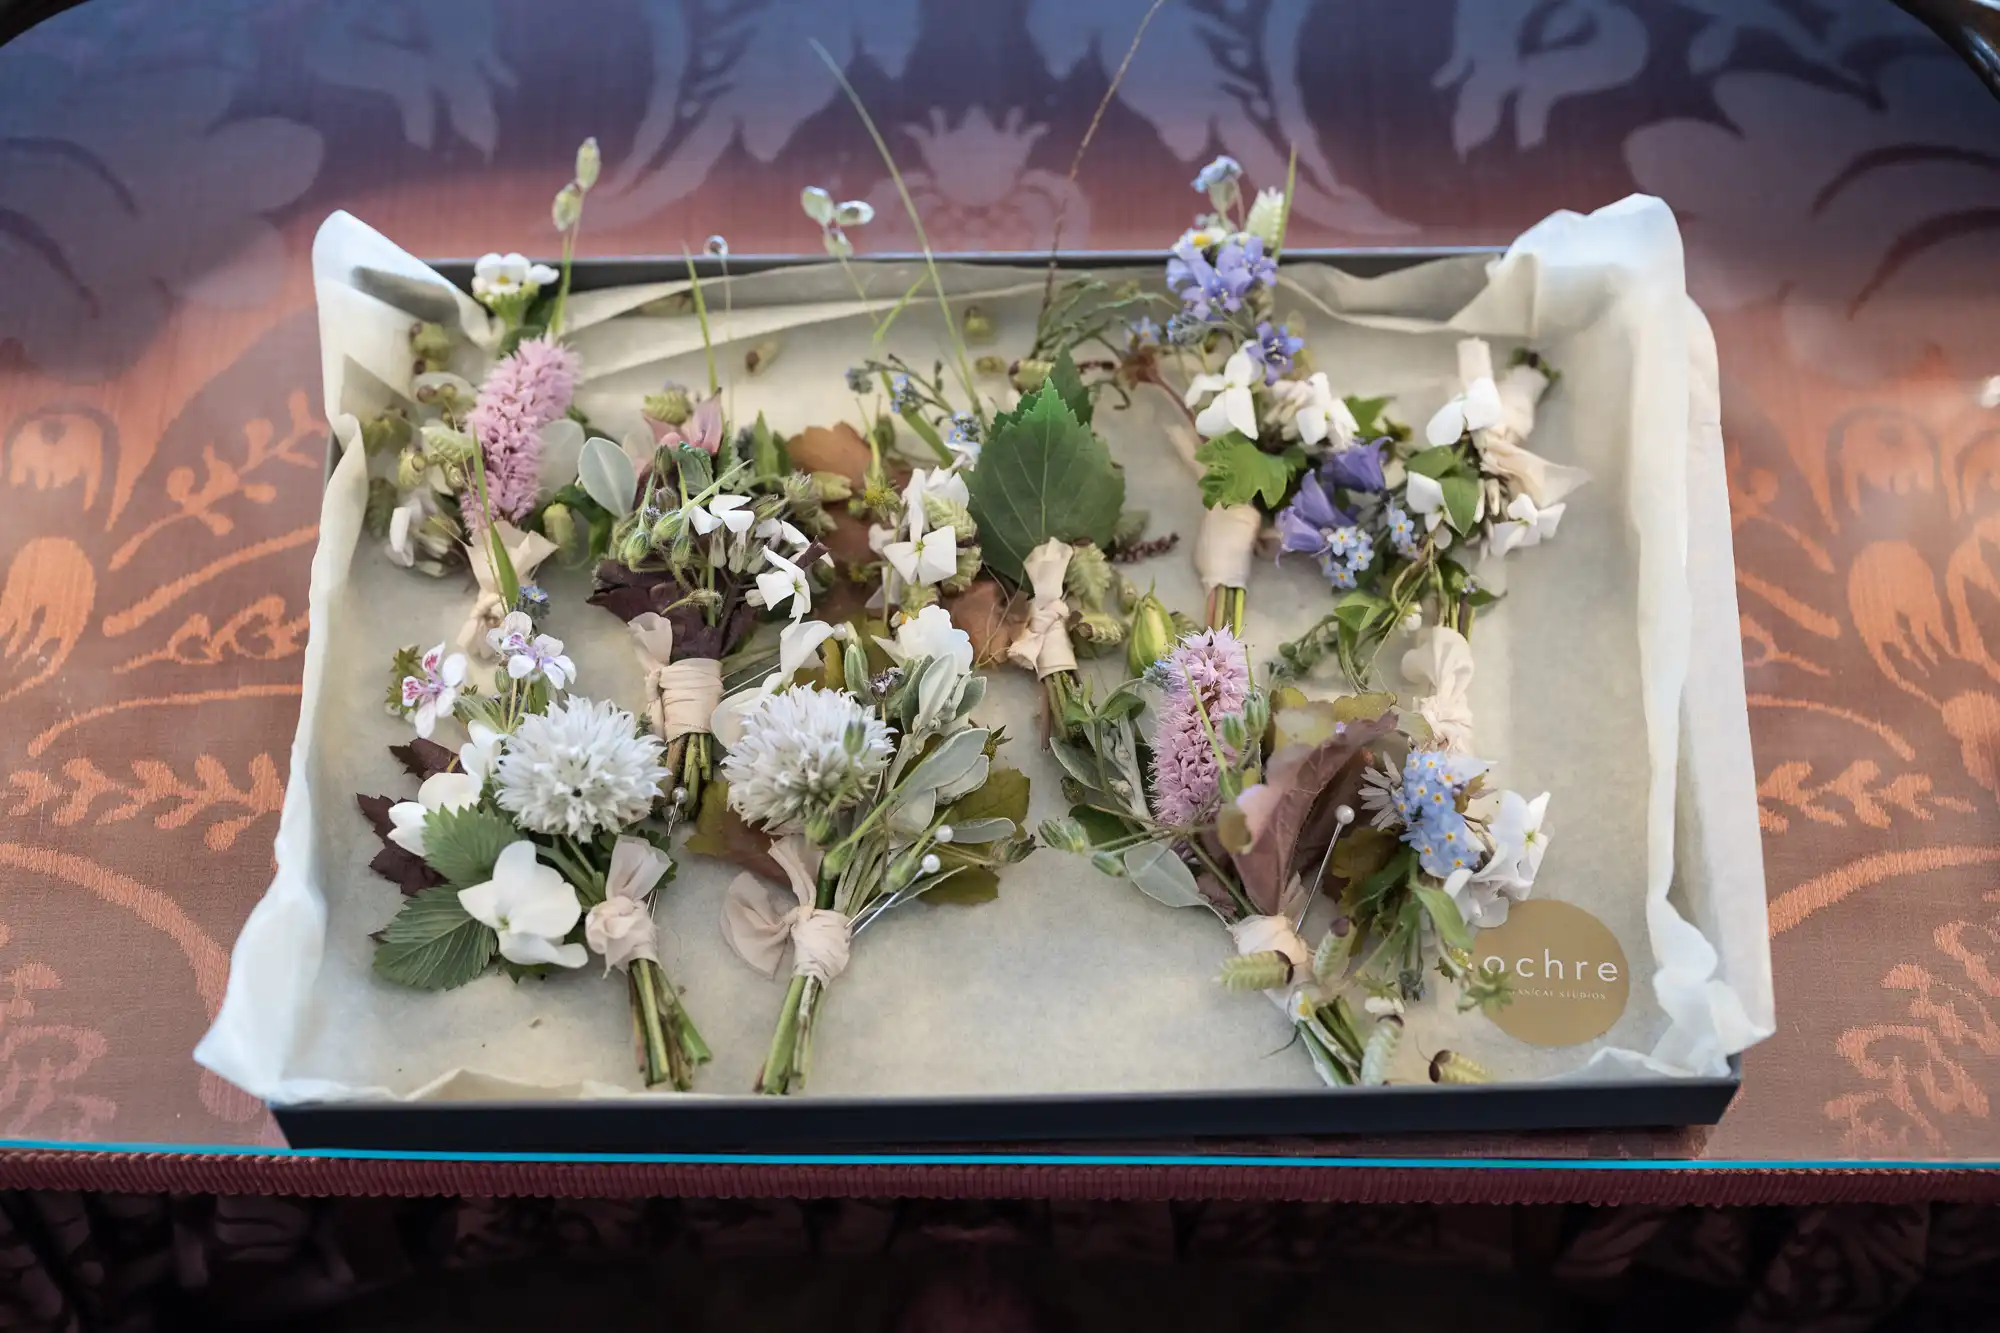 A tray with an assortment of fresh flowers and leaves on parchment paper, presented on a glass surface displaying a reflection.